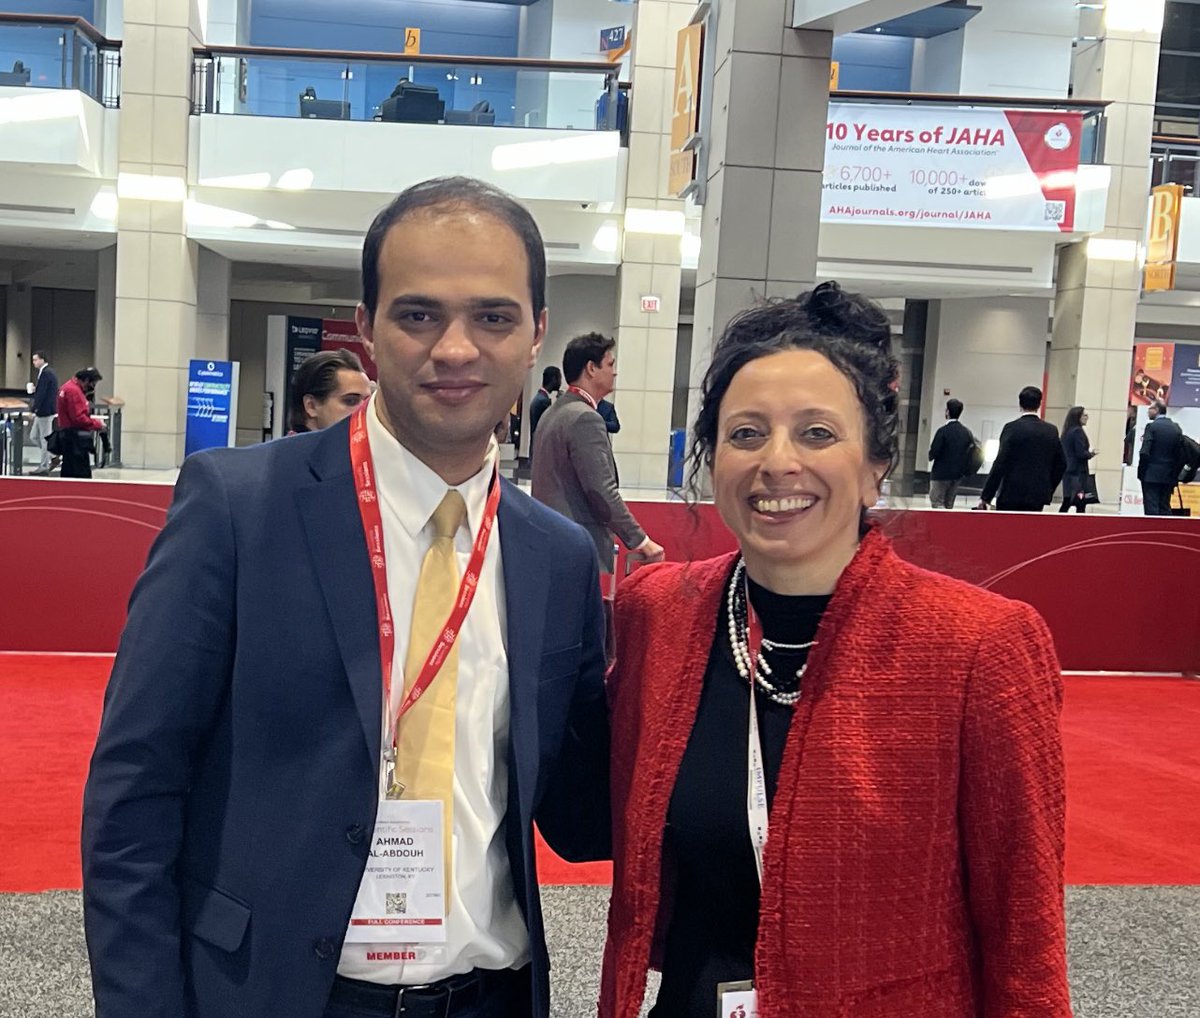 It was such a great experience to have 9 abstracts presented at #AHA22 and to meet my phenomenal mentor Dr @ErinMichos @AHAScience #AHA. Thanks to all of my mentors and collaborators. @timir_paul @moustafareda3 @Mohamedmagdieid @MohammedMhanna5 @wabusnina @UKHospitalists